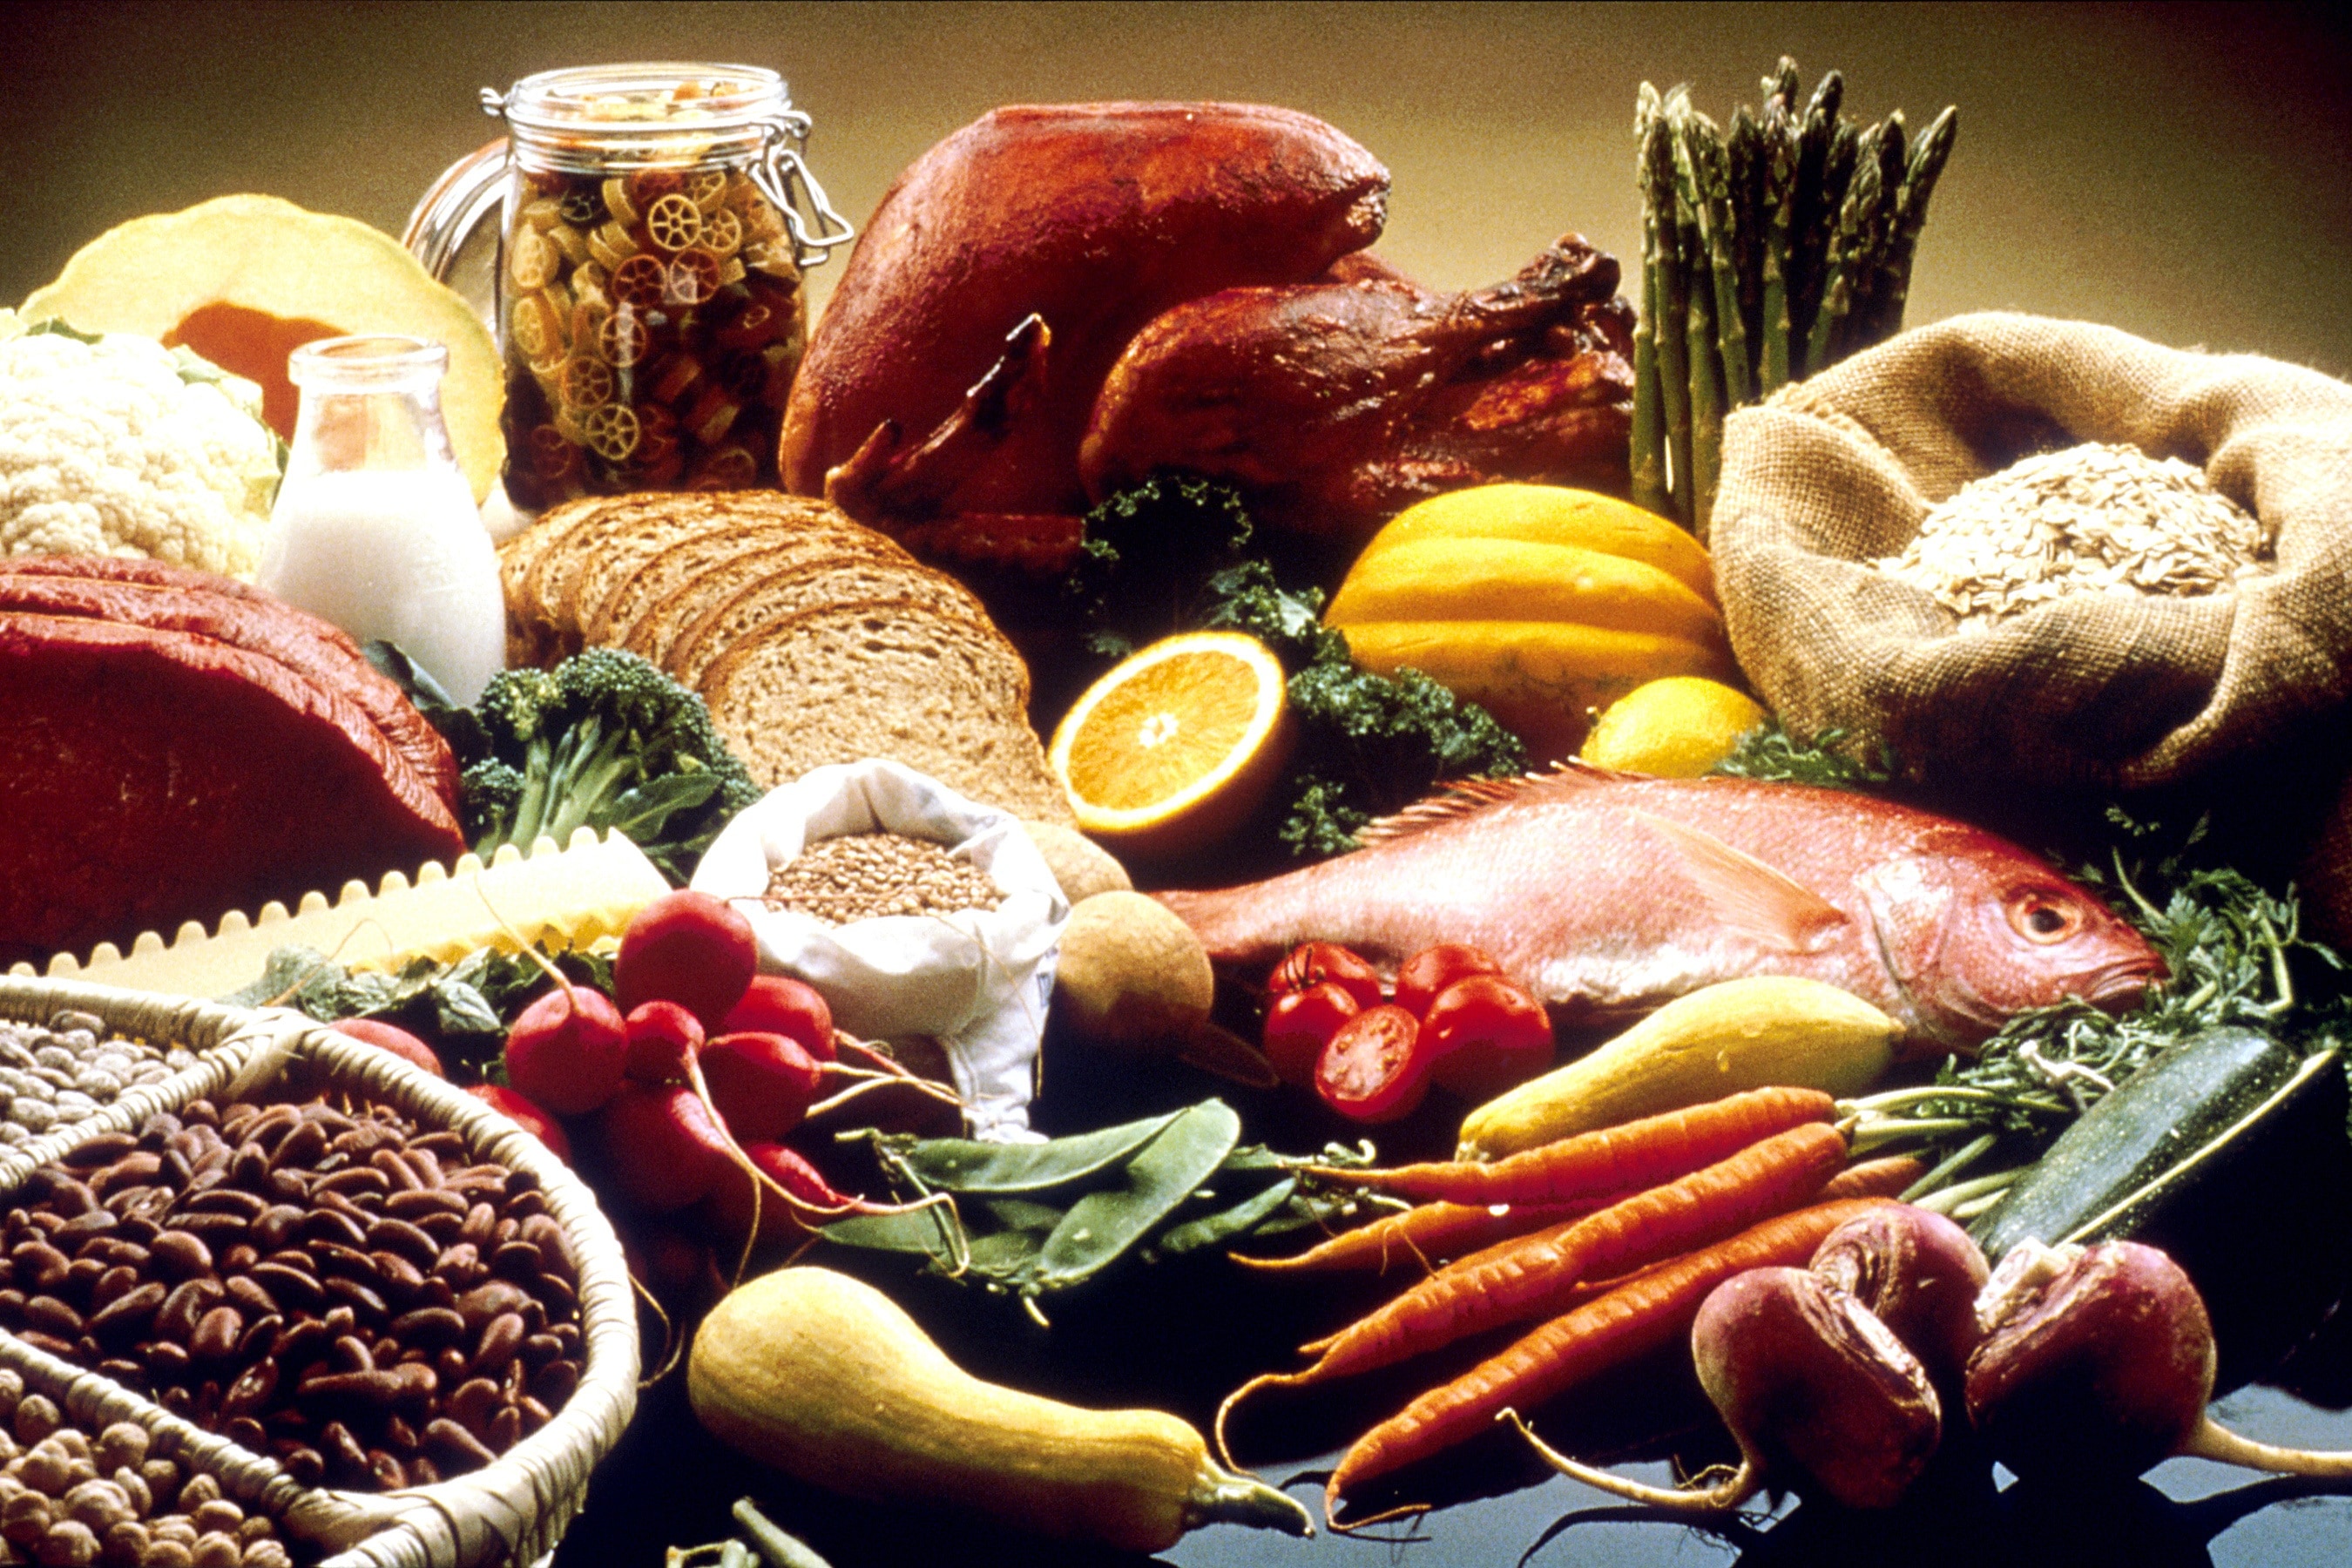 beans, bread, fish, meat, fruits and vegetables